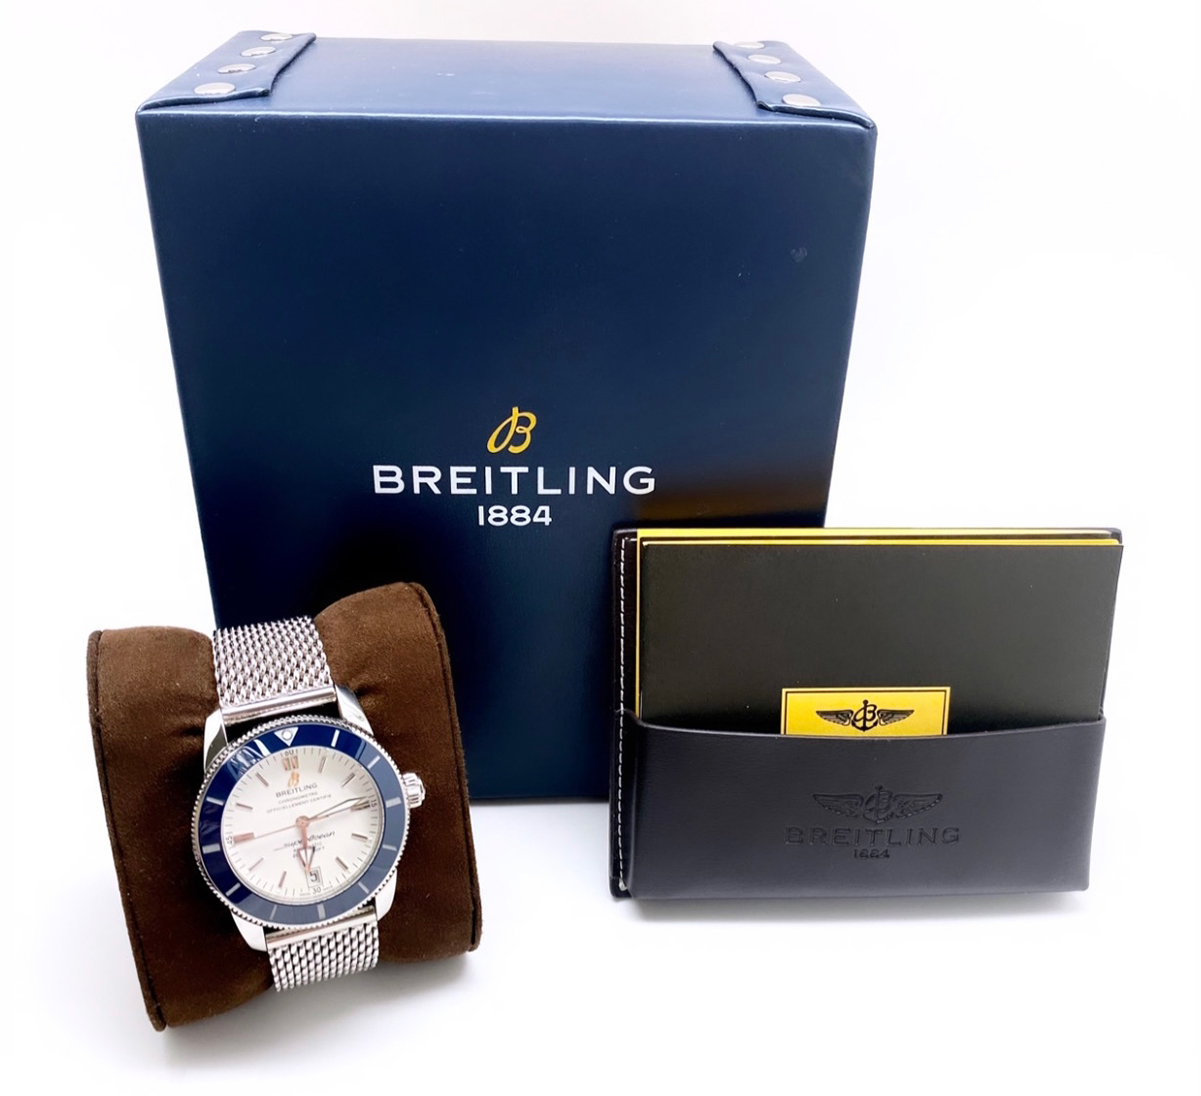 Breitling 1884, new and used packaging and paperwork, we take the frustration out of the process with expert new or used watch buyers | Sell My Used Watch to Expert Watch Buyers and Appraisers | Sell My Valuables for Cash